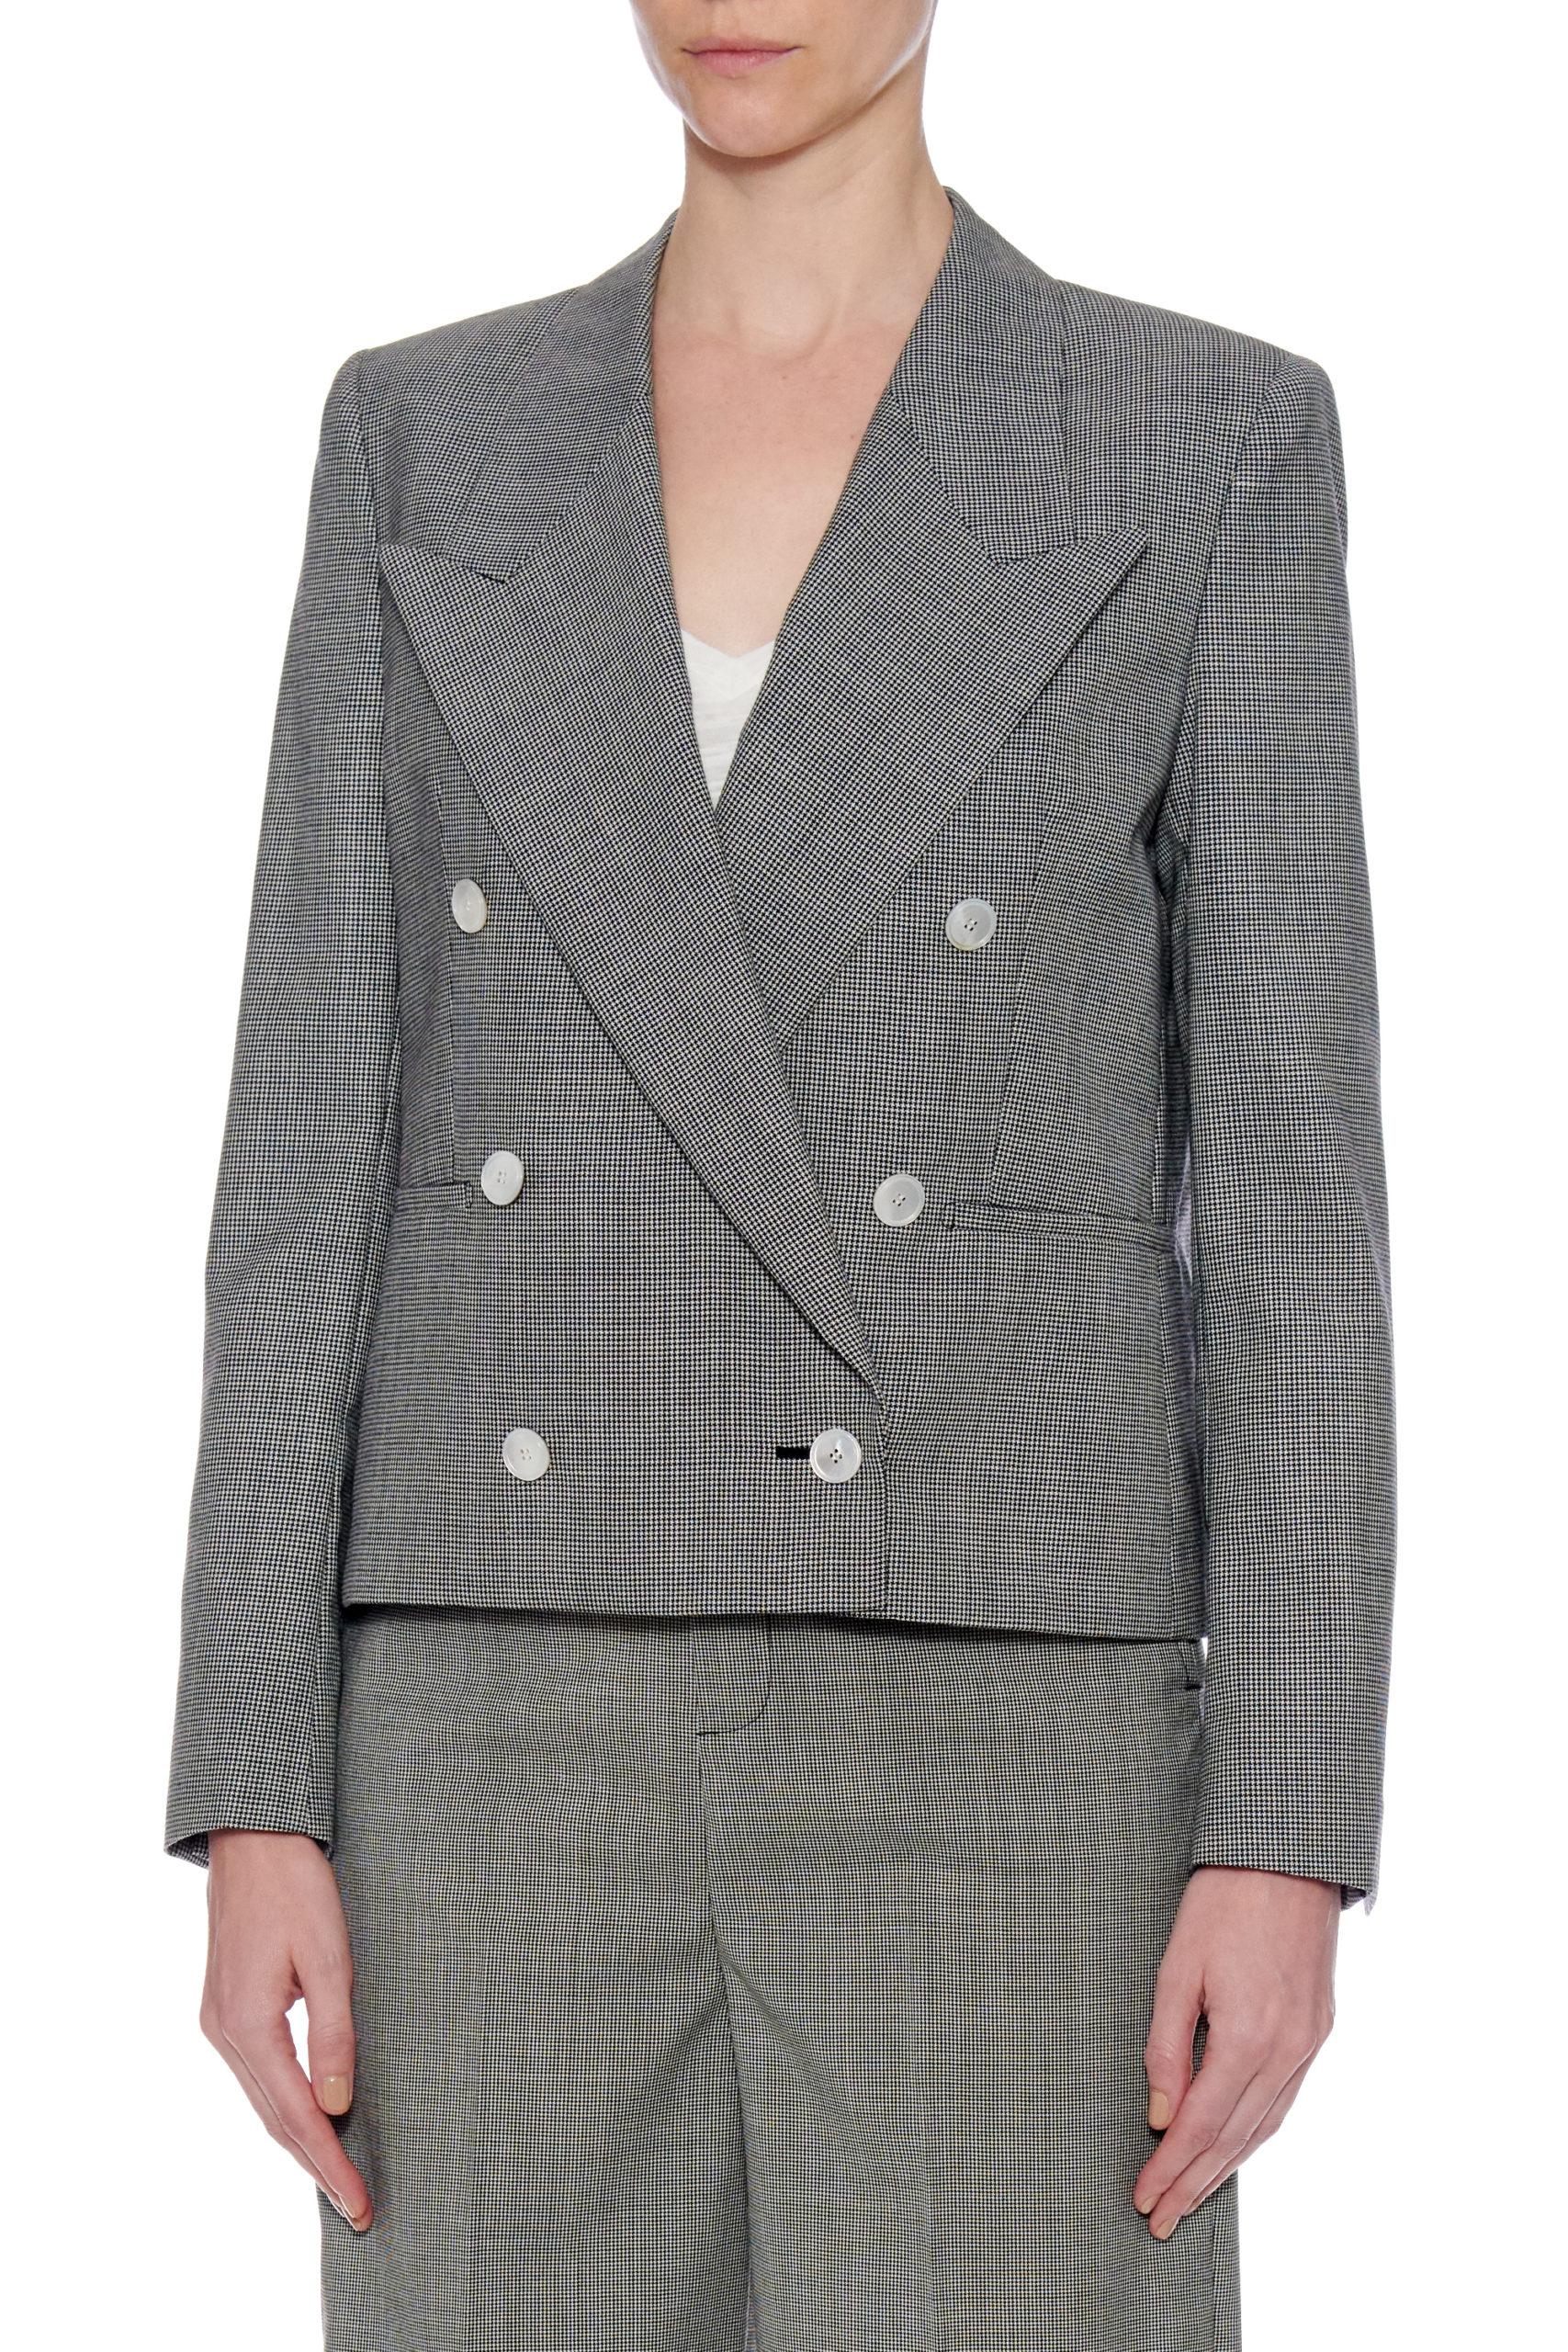 Oviedo Jacket – Peaked lapels, double breasted jacket in houndstooth